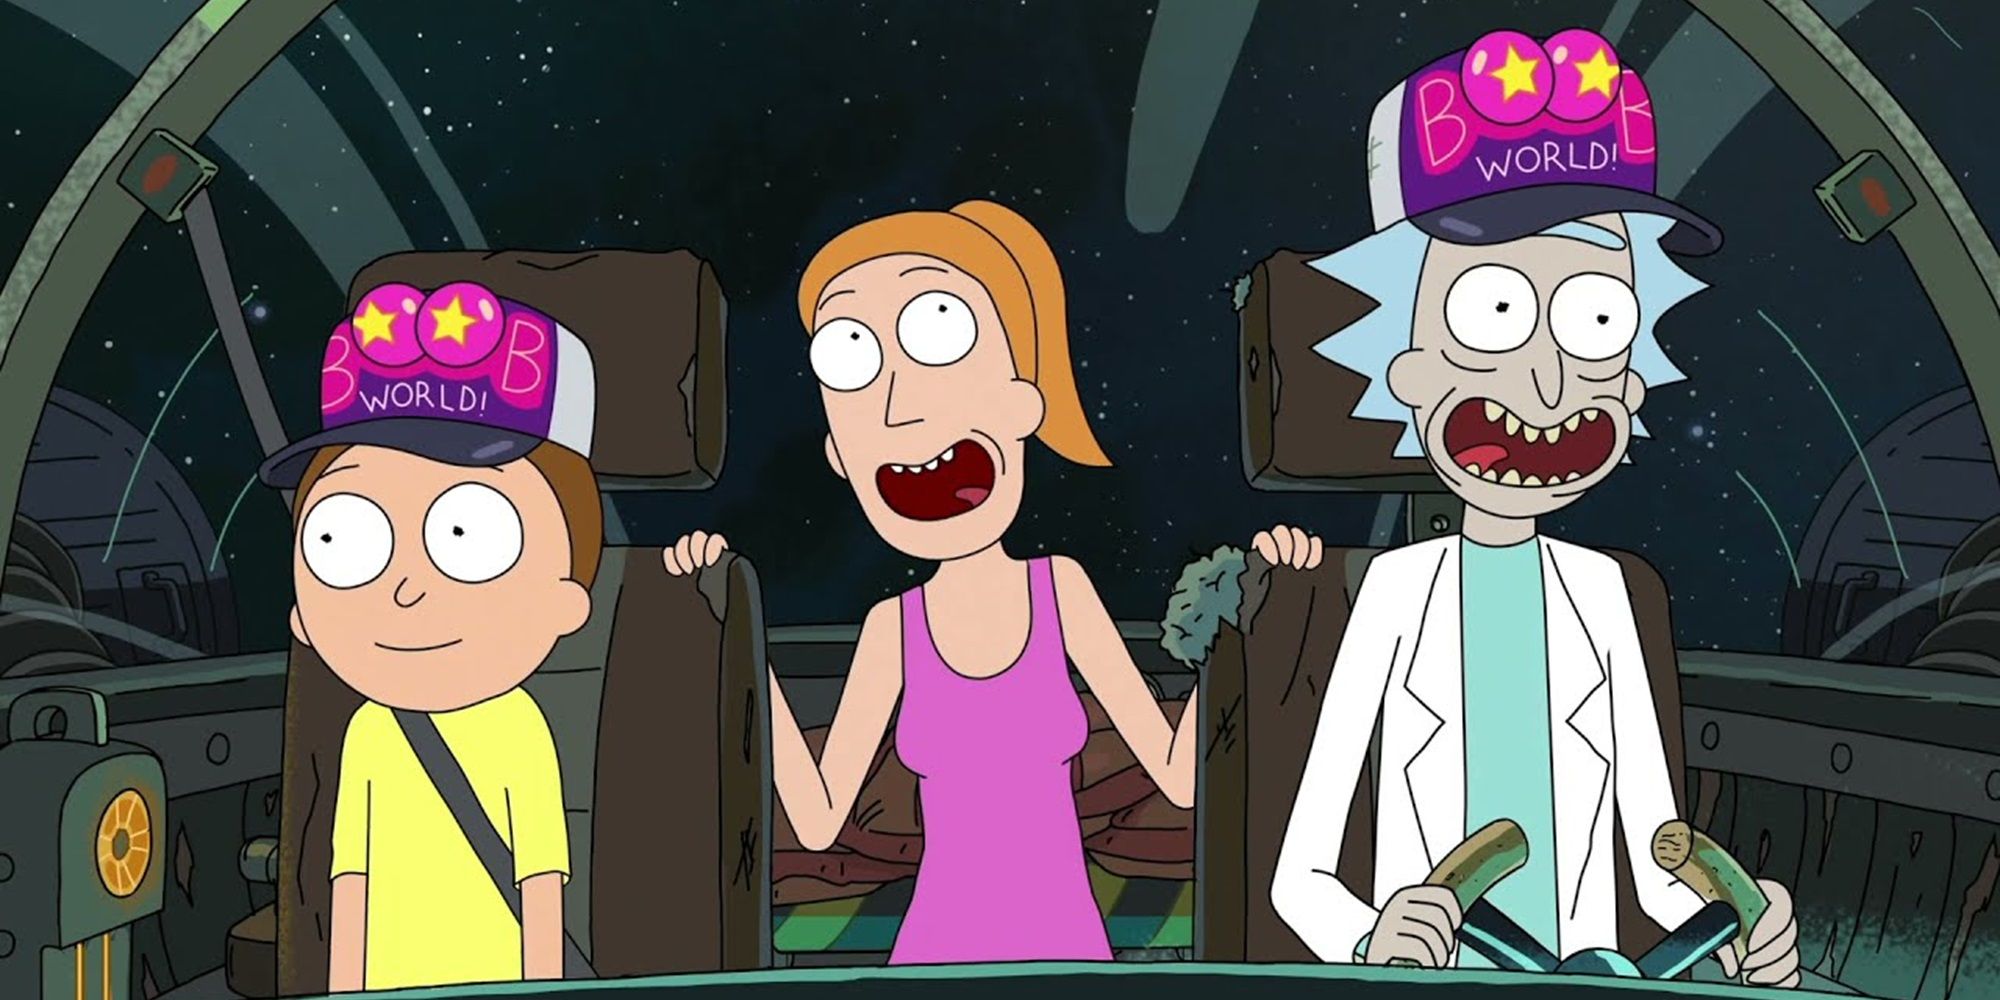 Rick and Morty on their way to Boob World with Summer